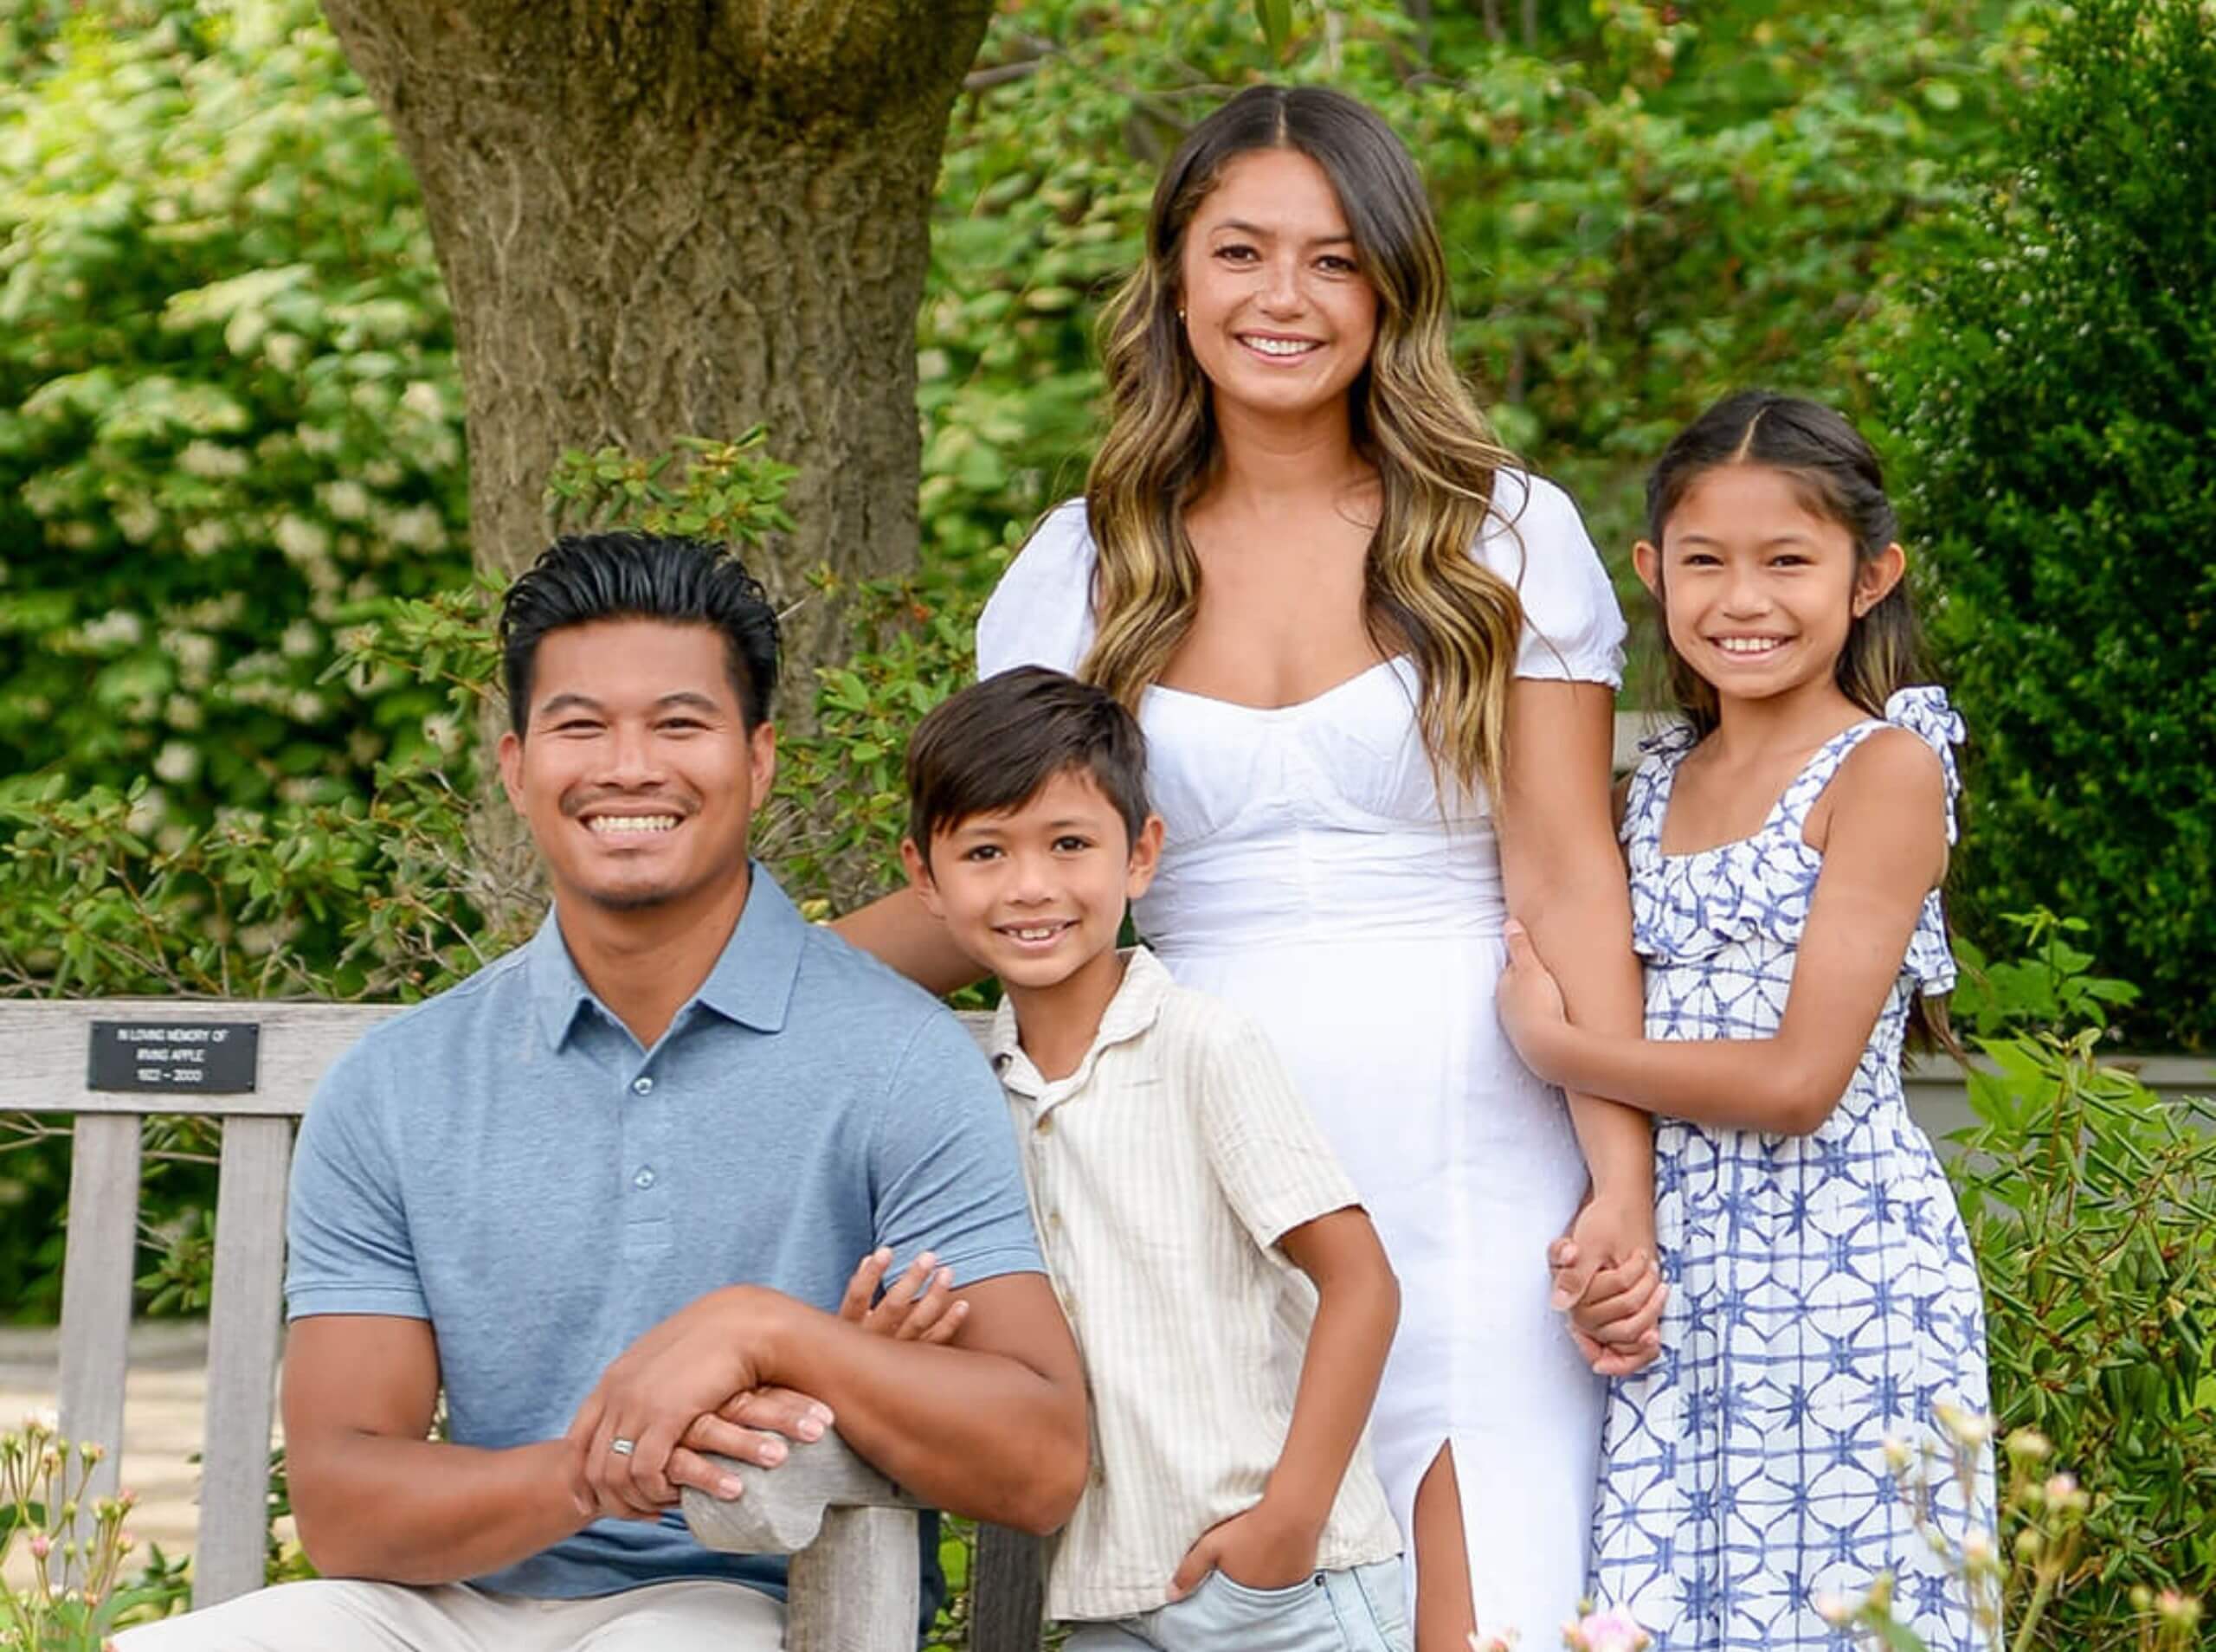 Photo Session + Photo Cards from JCPenney Portrait (Up to 83% Off)